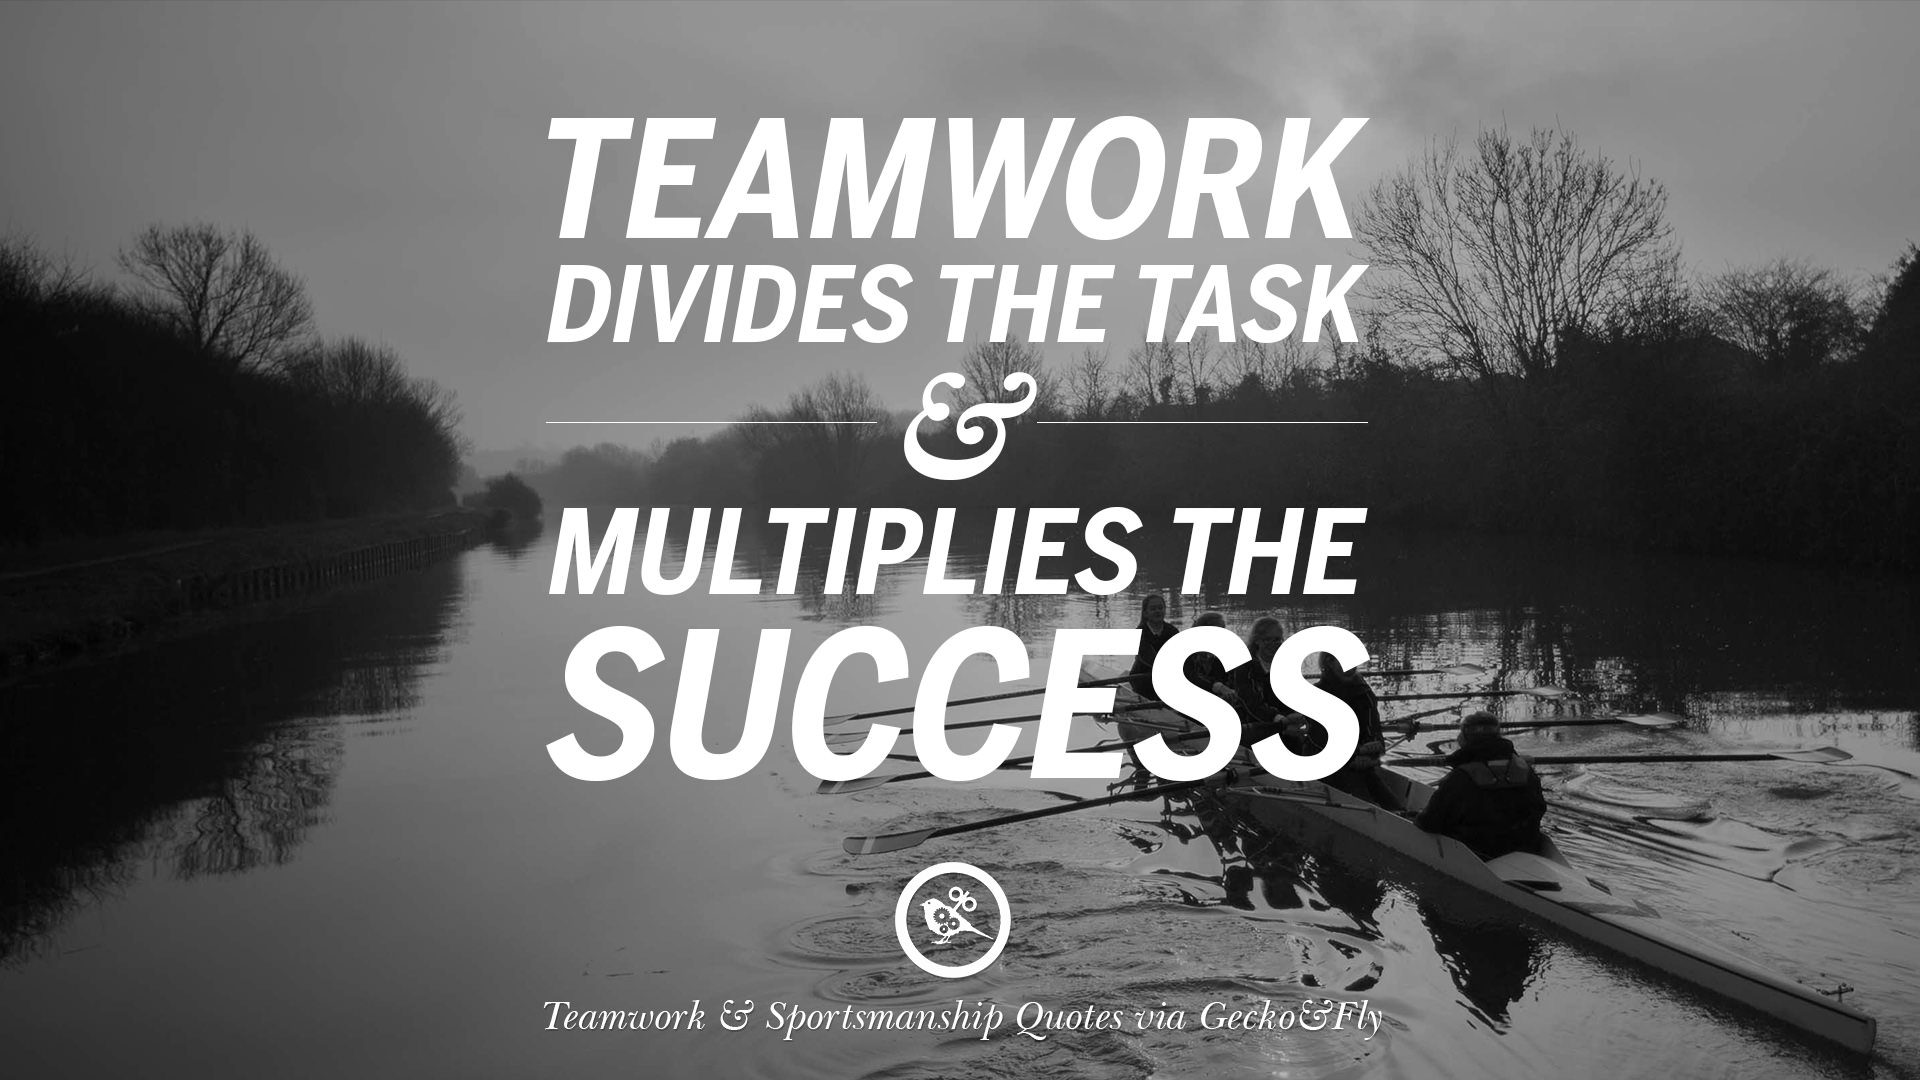 Best Short Teamwork Quotes  The ultimate guide 